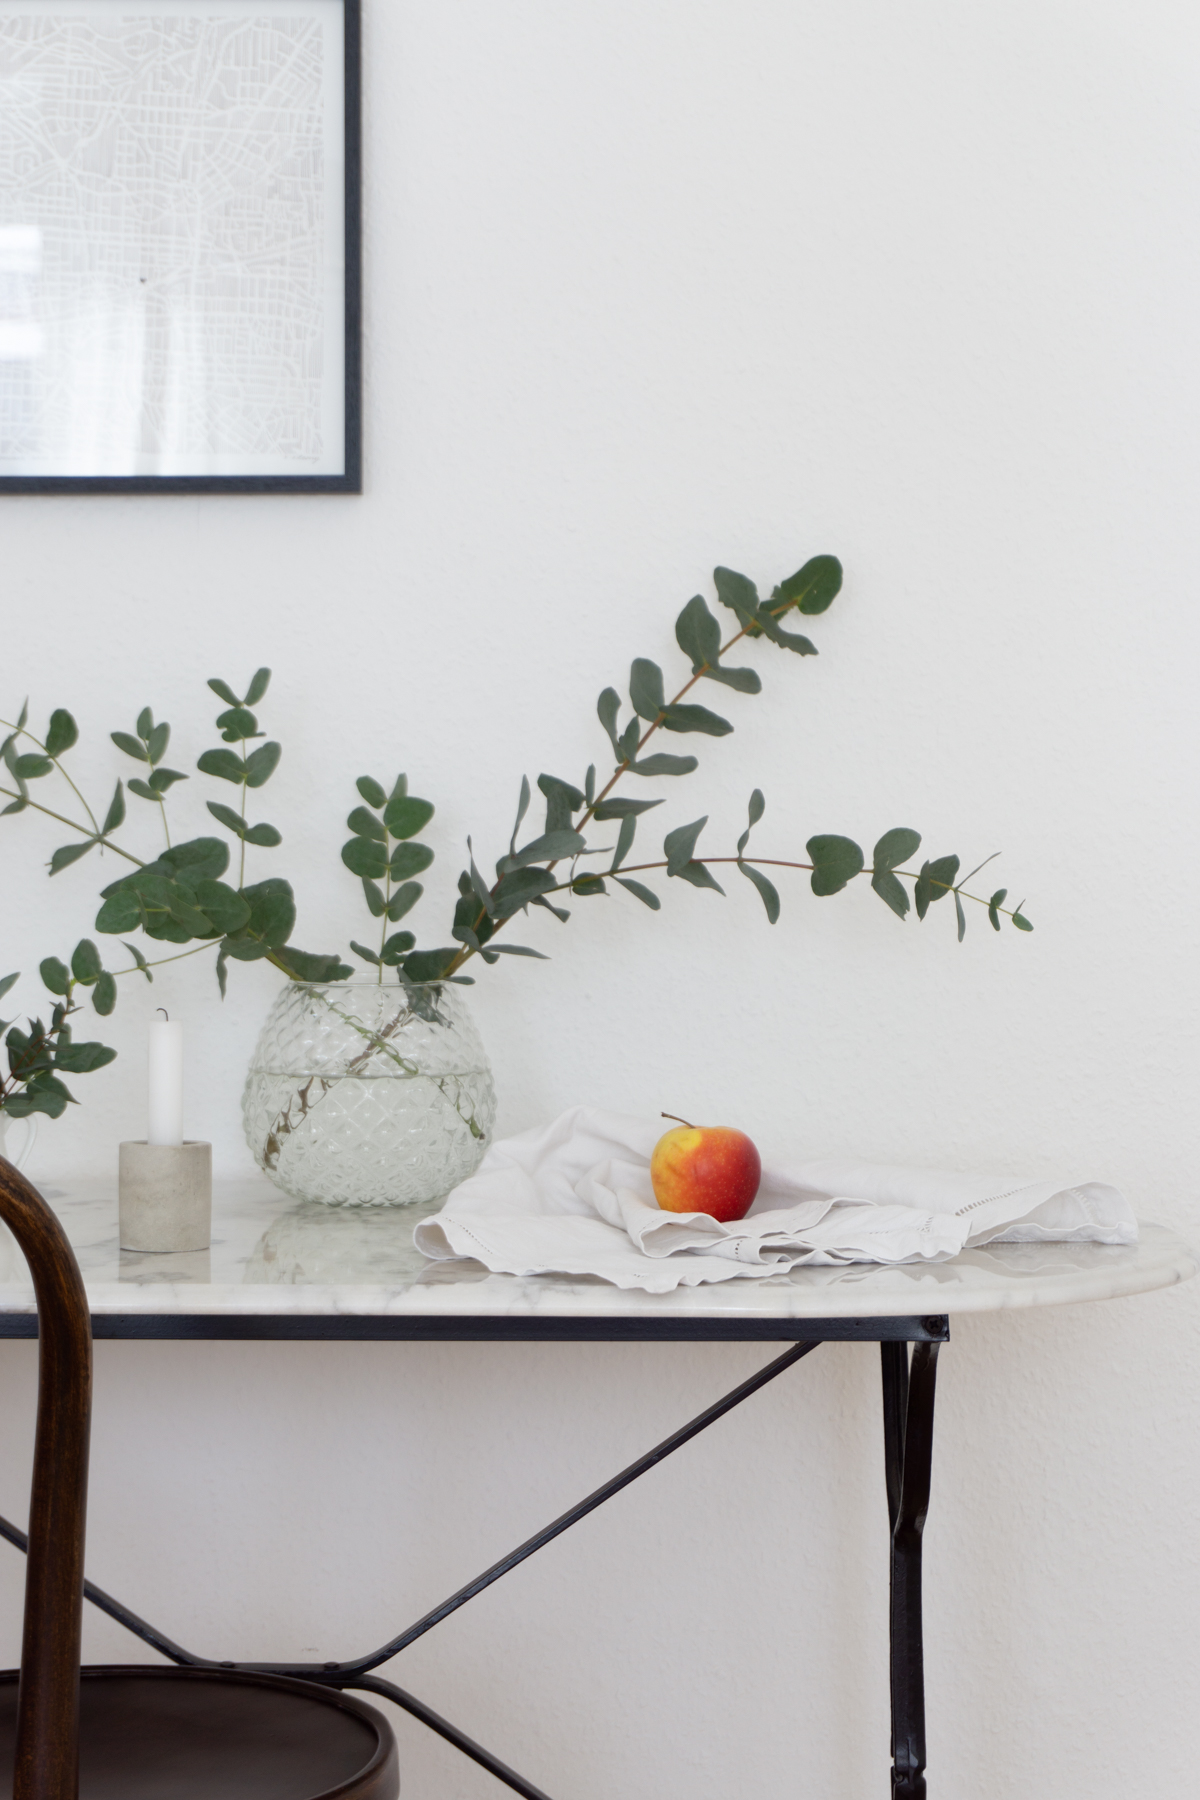 French Inspired Vintage Still Life - Marble Table, Eucalyptus, Apple, Candle - Scandinavian Interior / RG Daily Blog